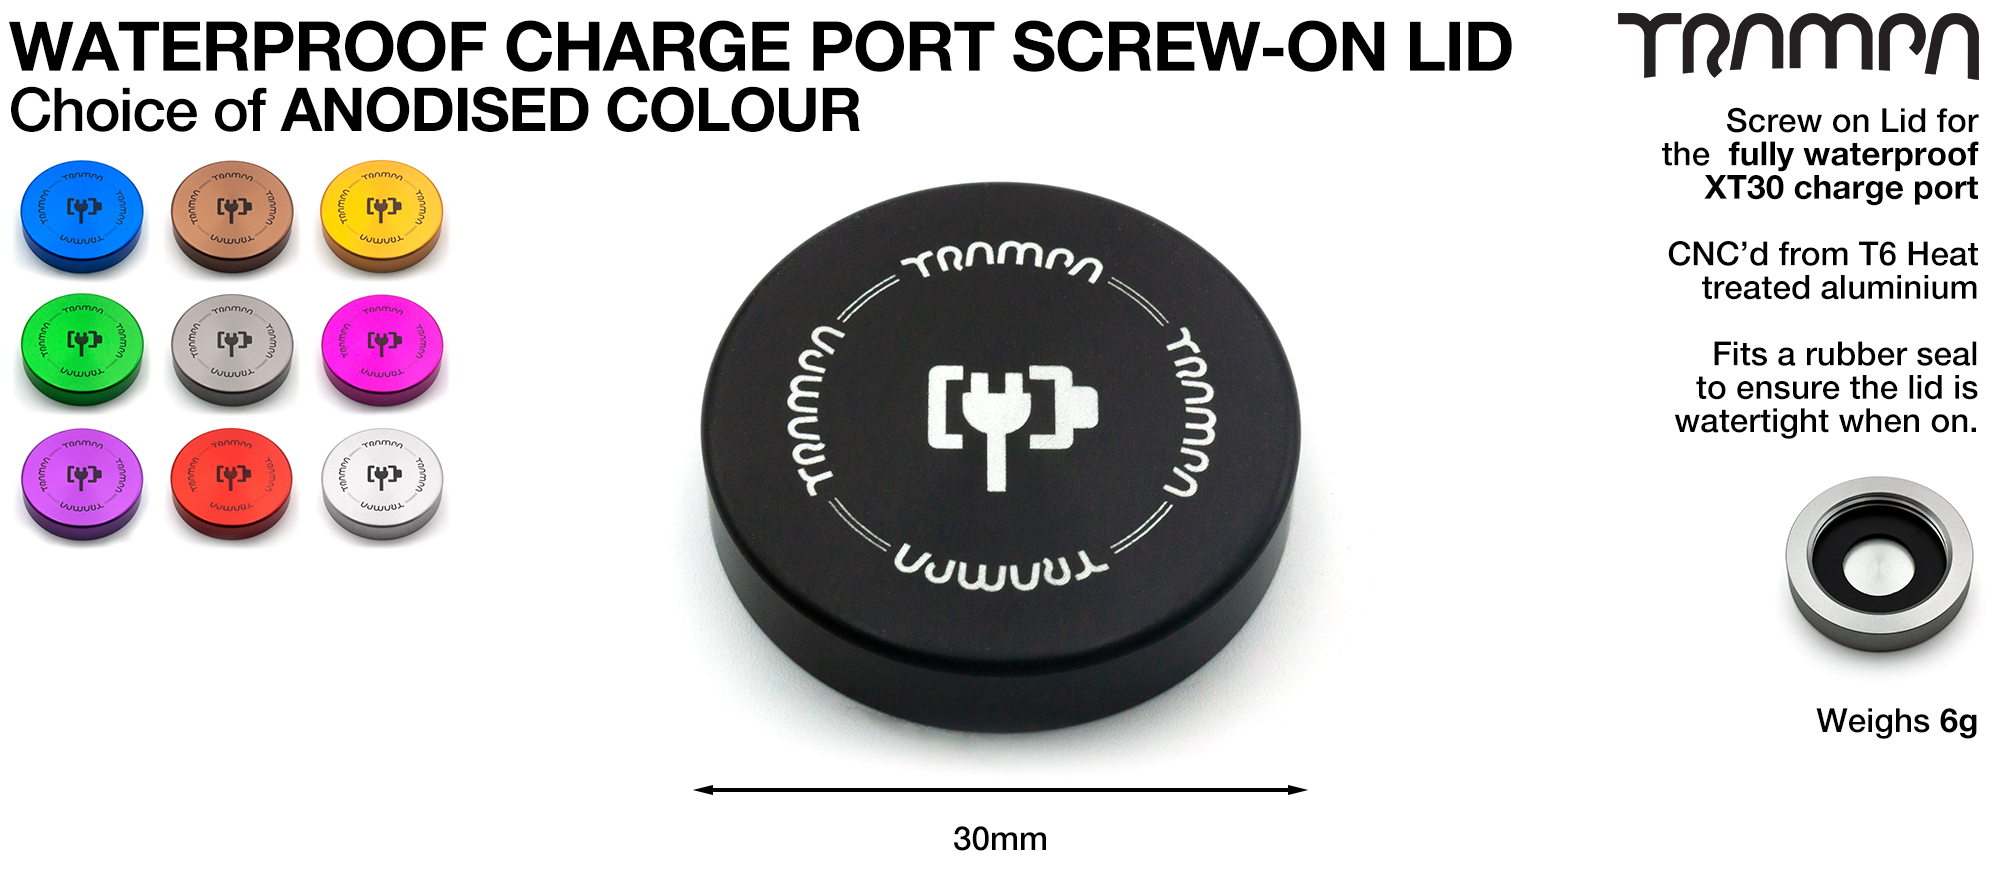 Charge Point TOP - Anodised 